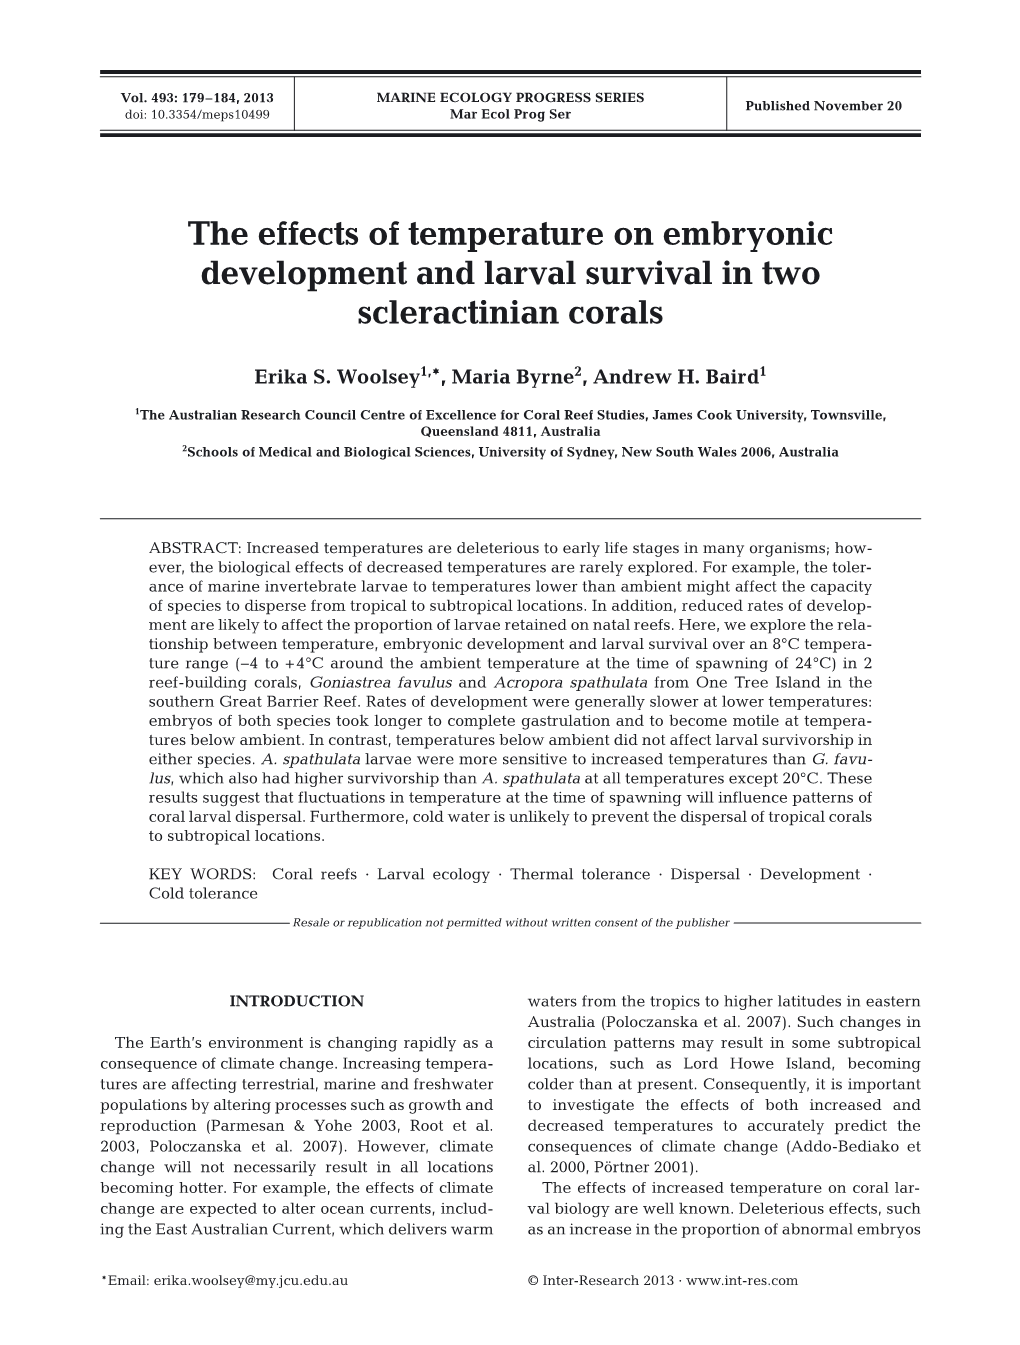 The Effects of Temperature on Embryonic Development and Larval Survival in Two Scleractinian Corals